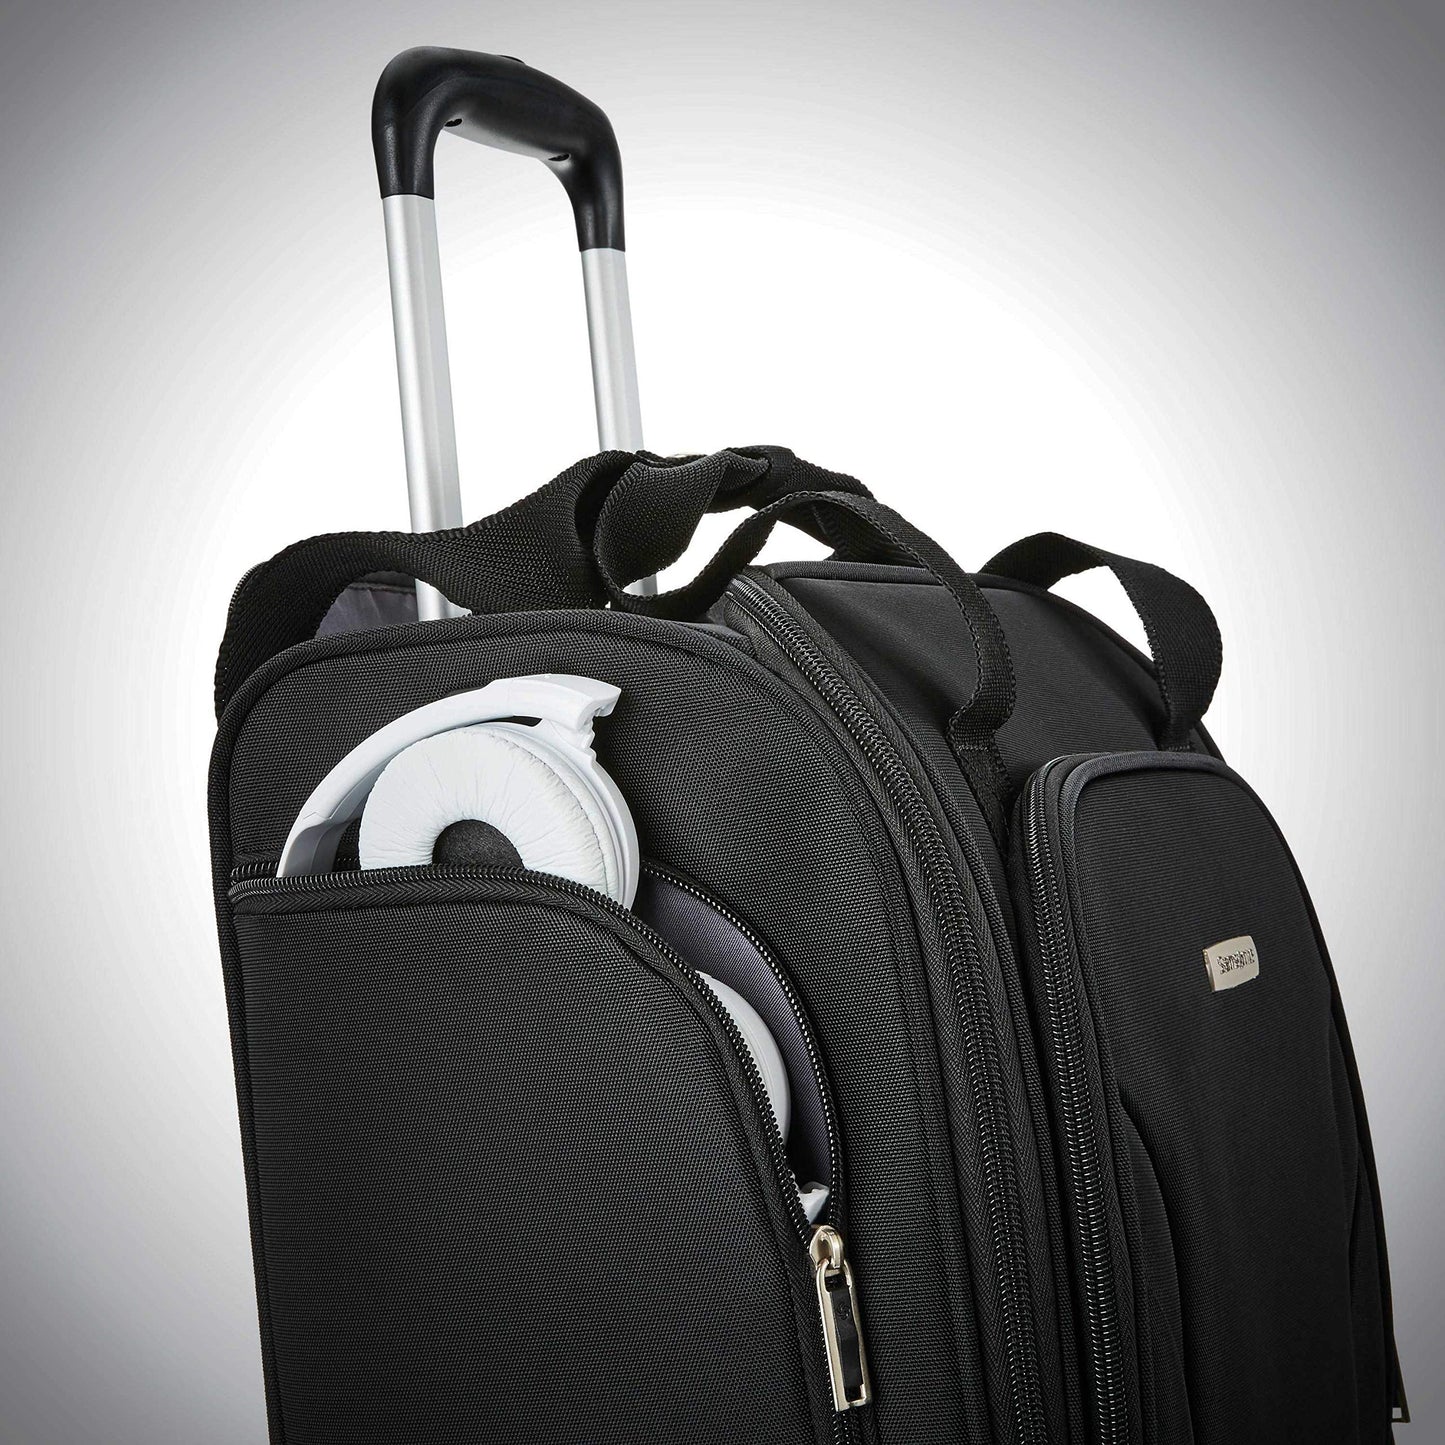 Samsonite Underseat Carry-on Spinner with USB Port, Underseat Carry-on Spinner With Usb Port